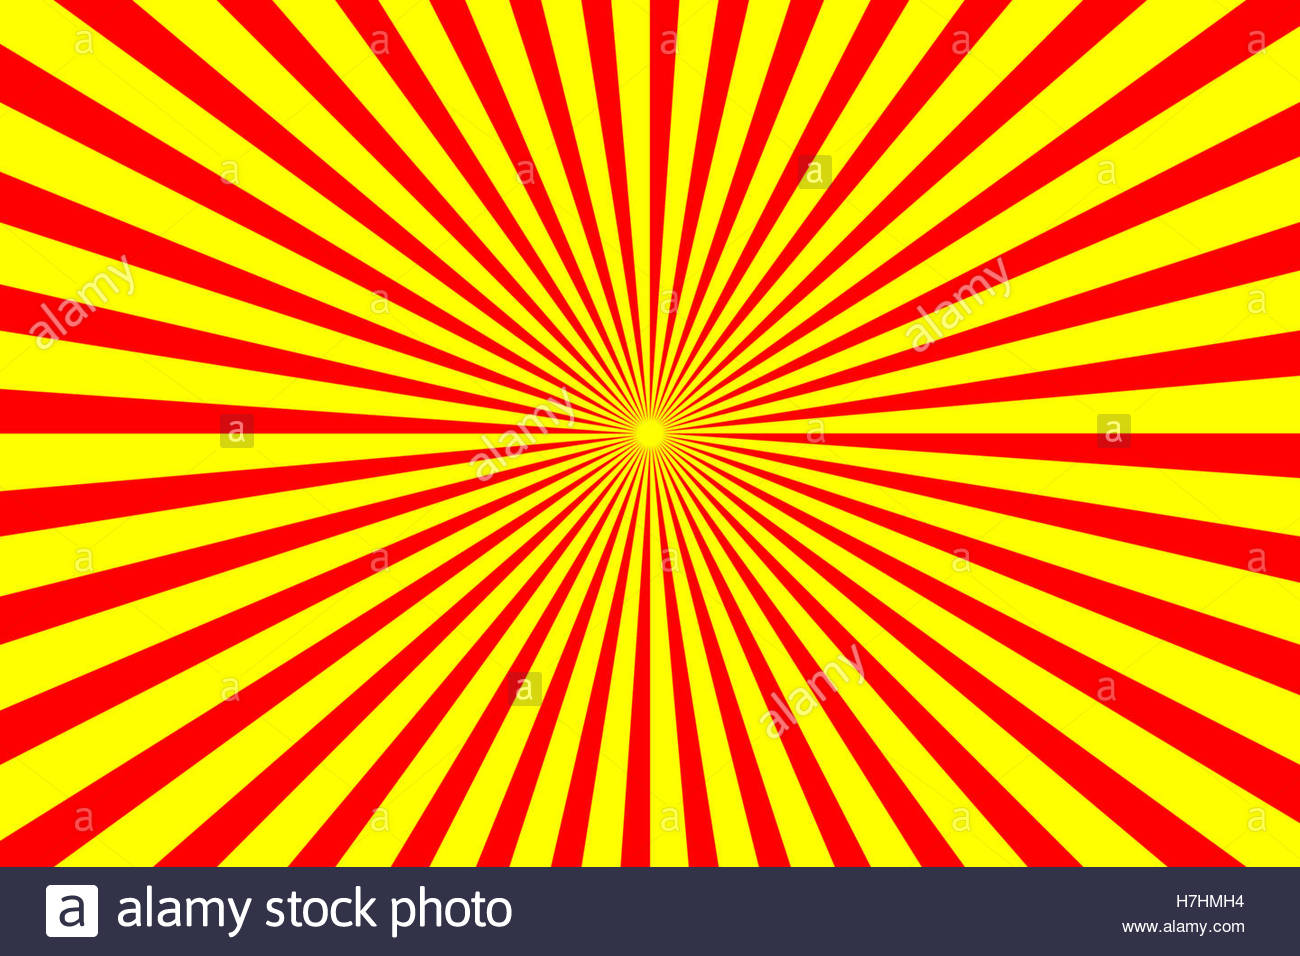 Radiating Yellow And Red Line Background Stock Photo